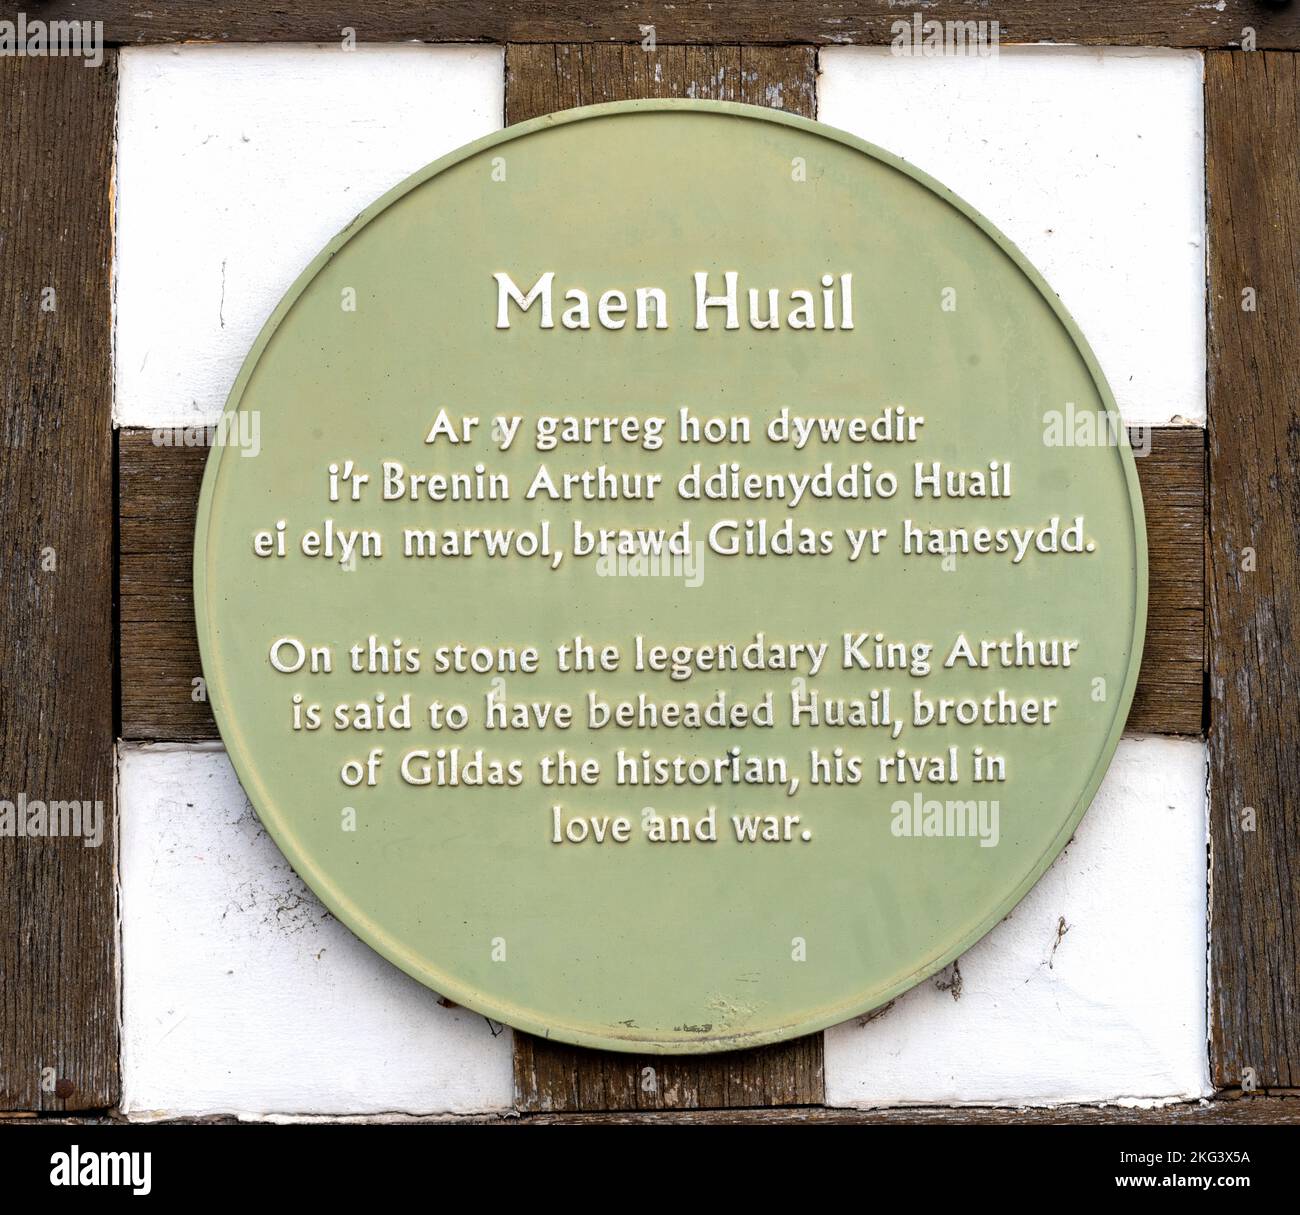 Green heritage plaque at Maen Huail is a stone block at St Peter's Square in the centre of Ruthin, Denbighshire, Wales, Uk. - Stock Photo